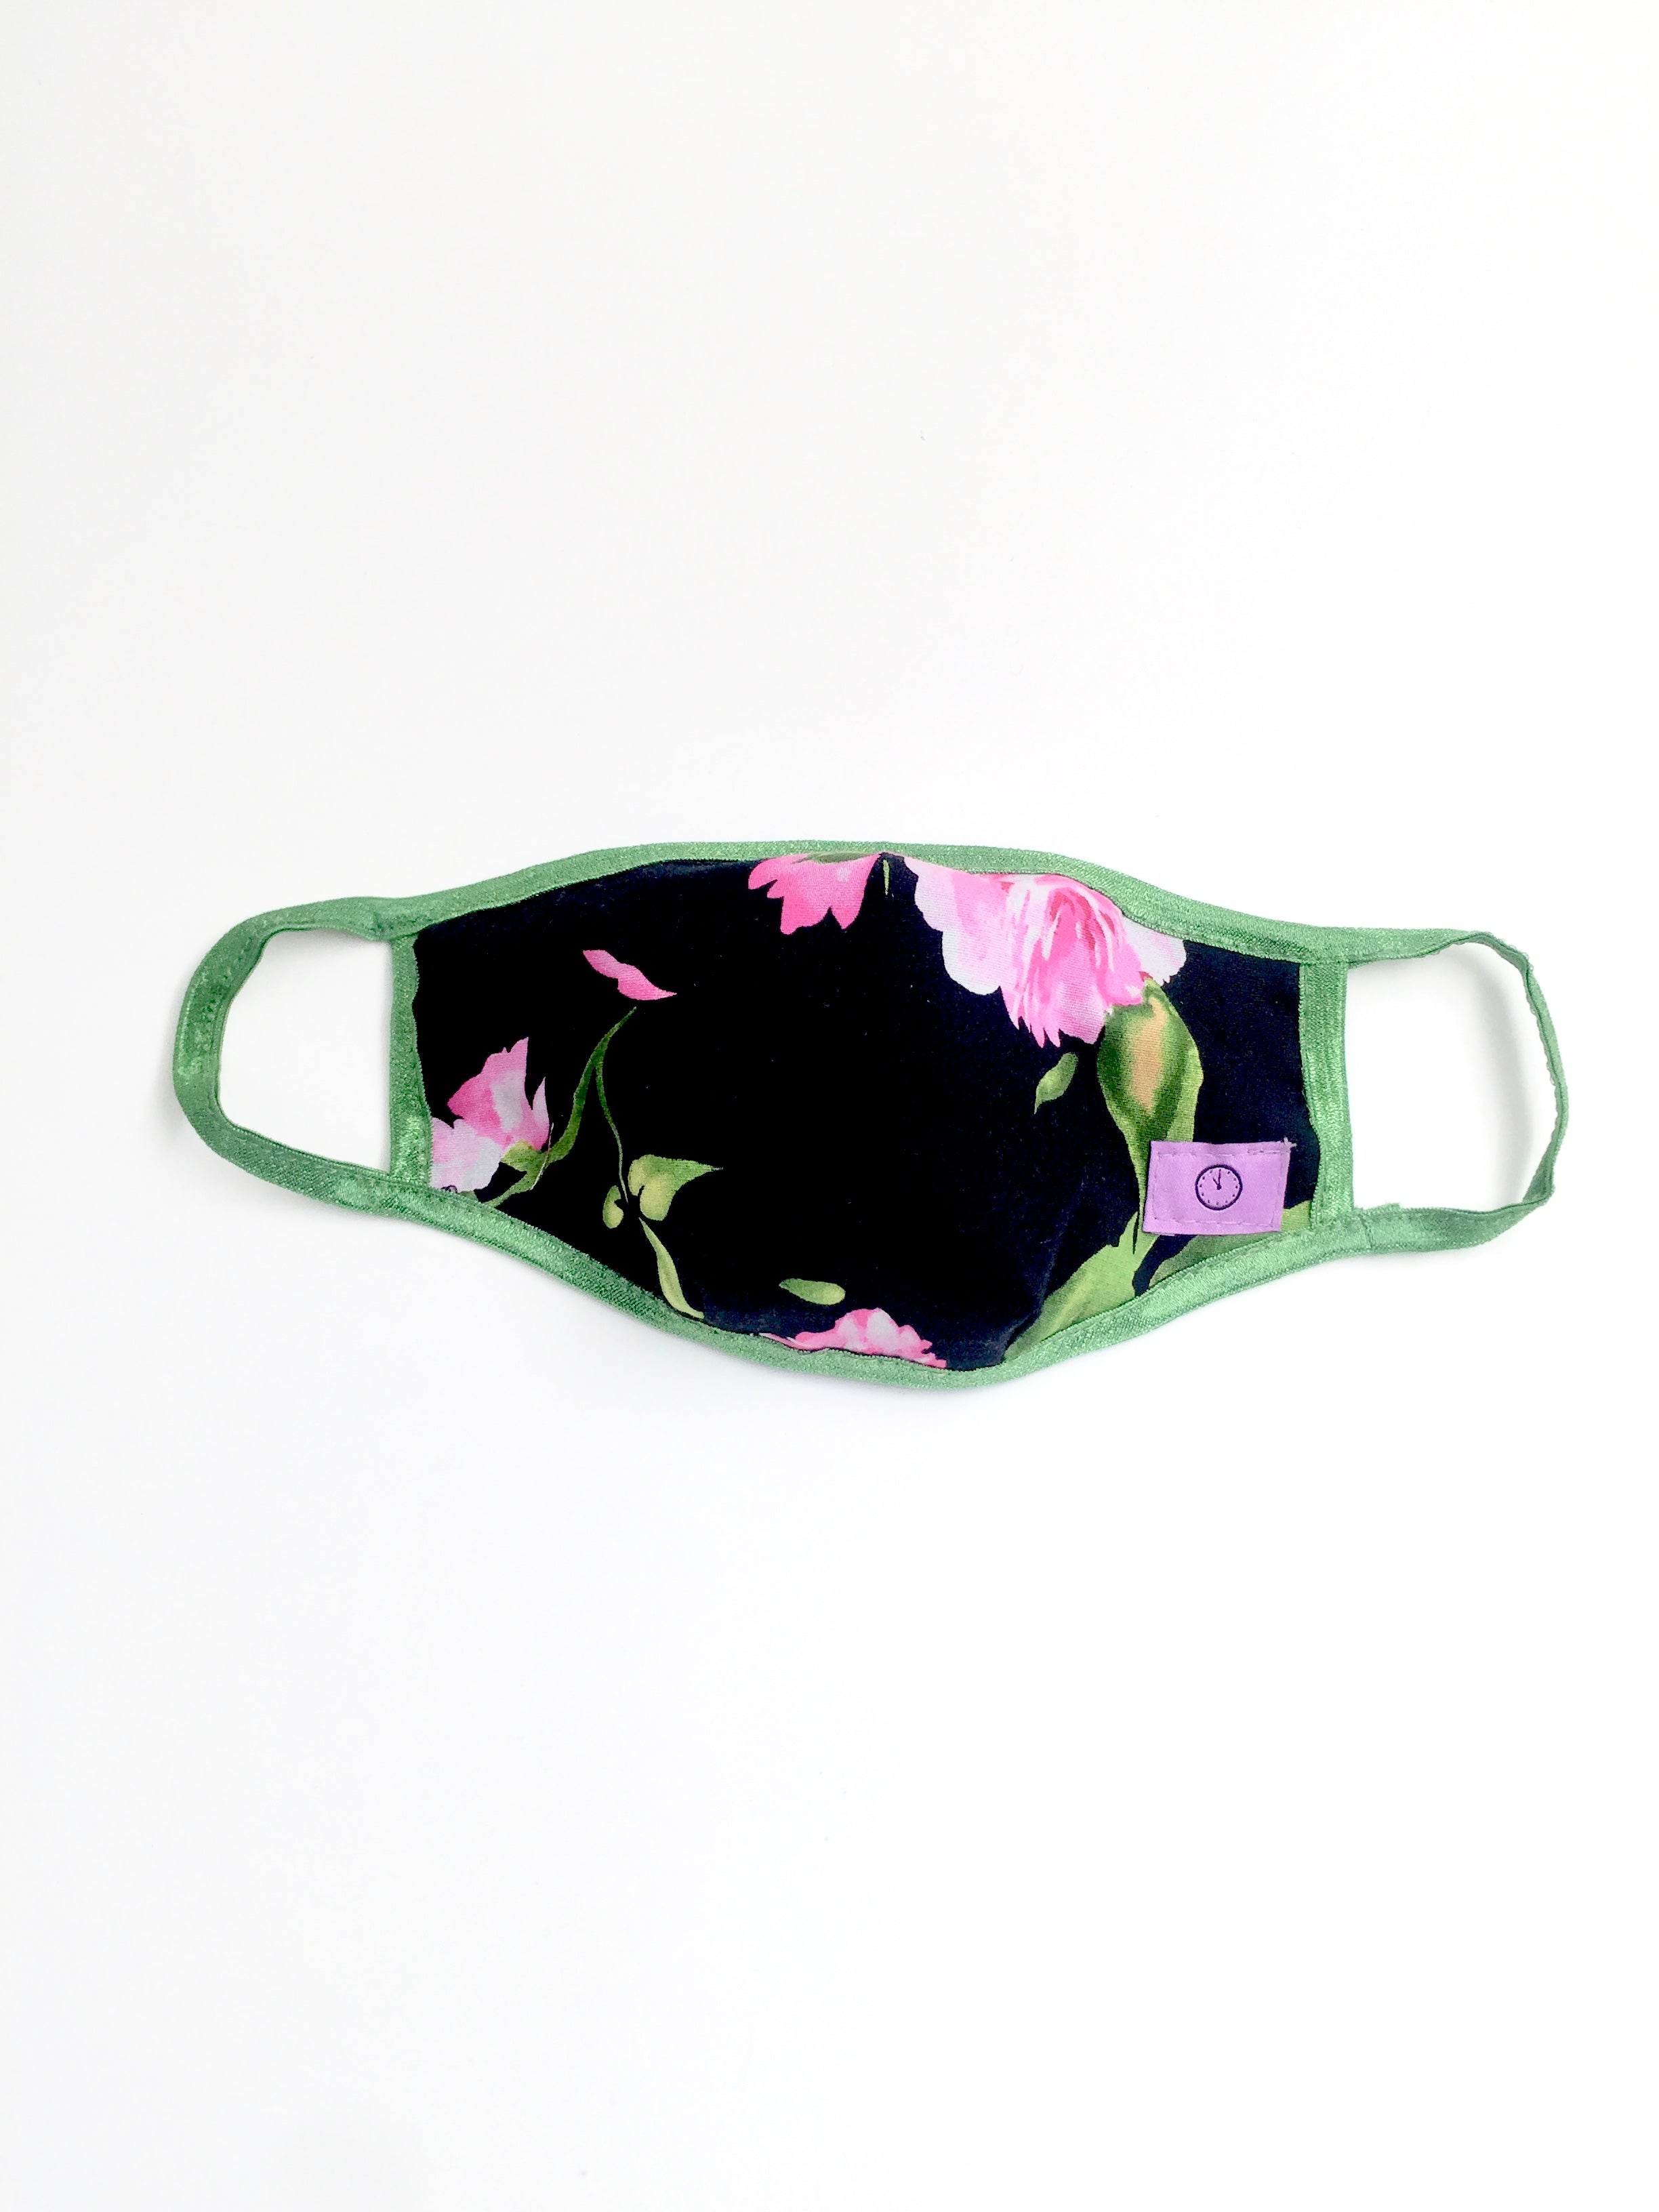 Child Mask - Black with pink florals and green piping